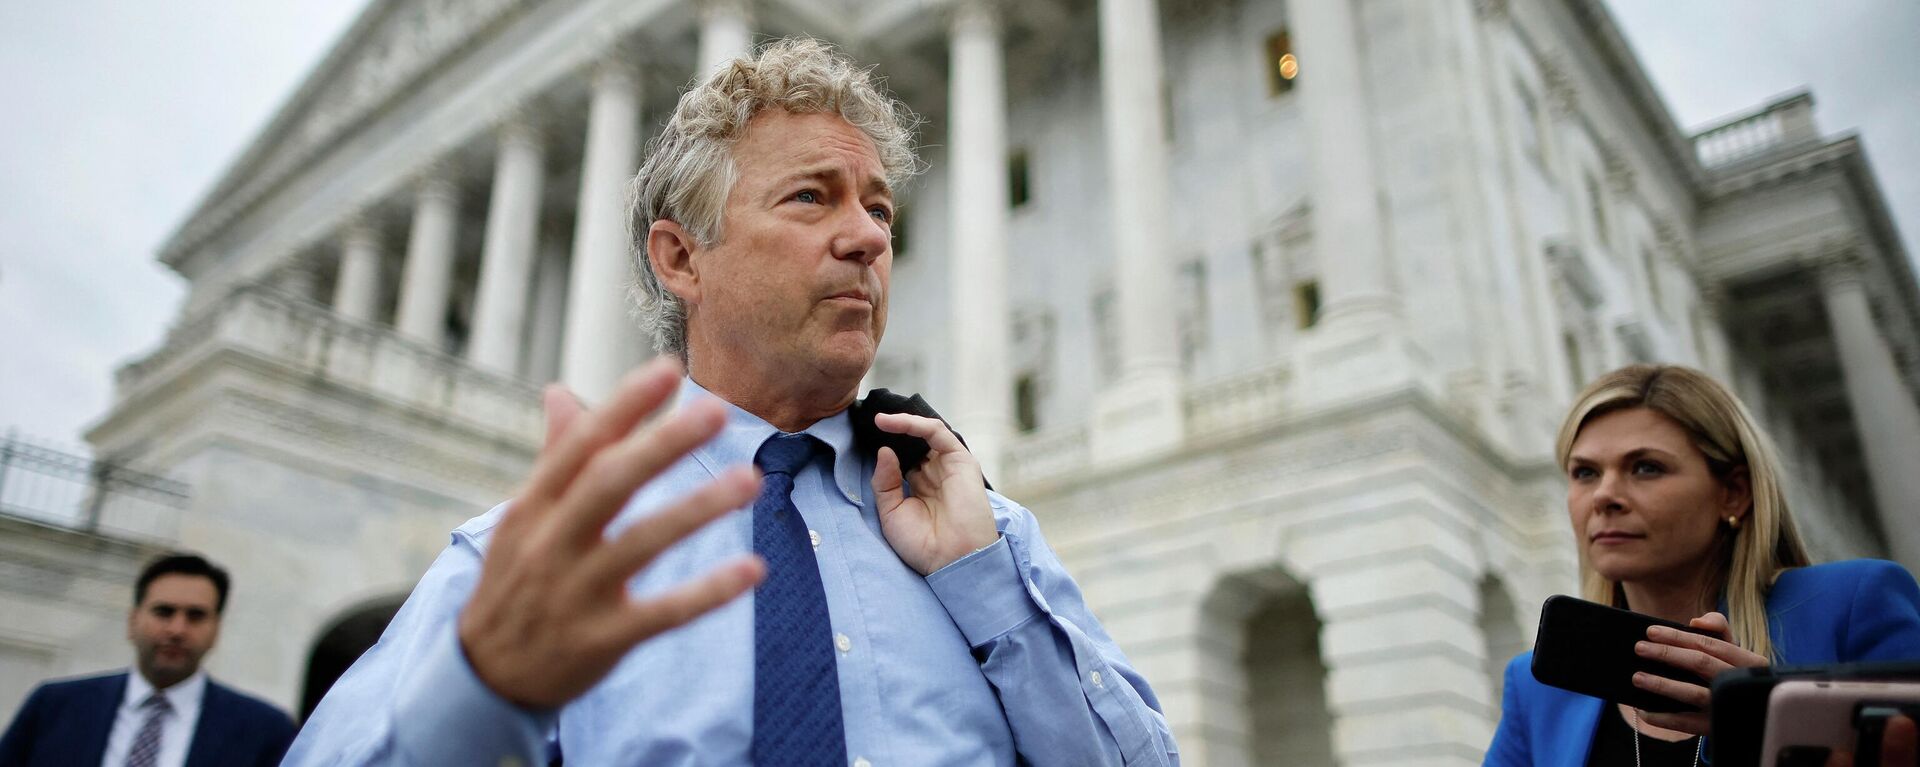 Sen. Rand Paul (R-KY) talks with journalists as he leaves the U.S. Capitol after delivering a speech about the Bipartisan Safer Communities Act on the Senate floor on June 23, 2022 in Washington, DC - Sputnik International, 1920, 10.09.2022